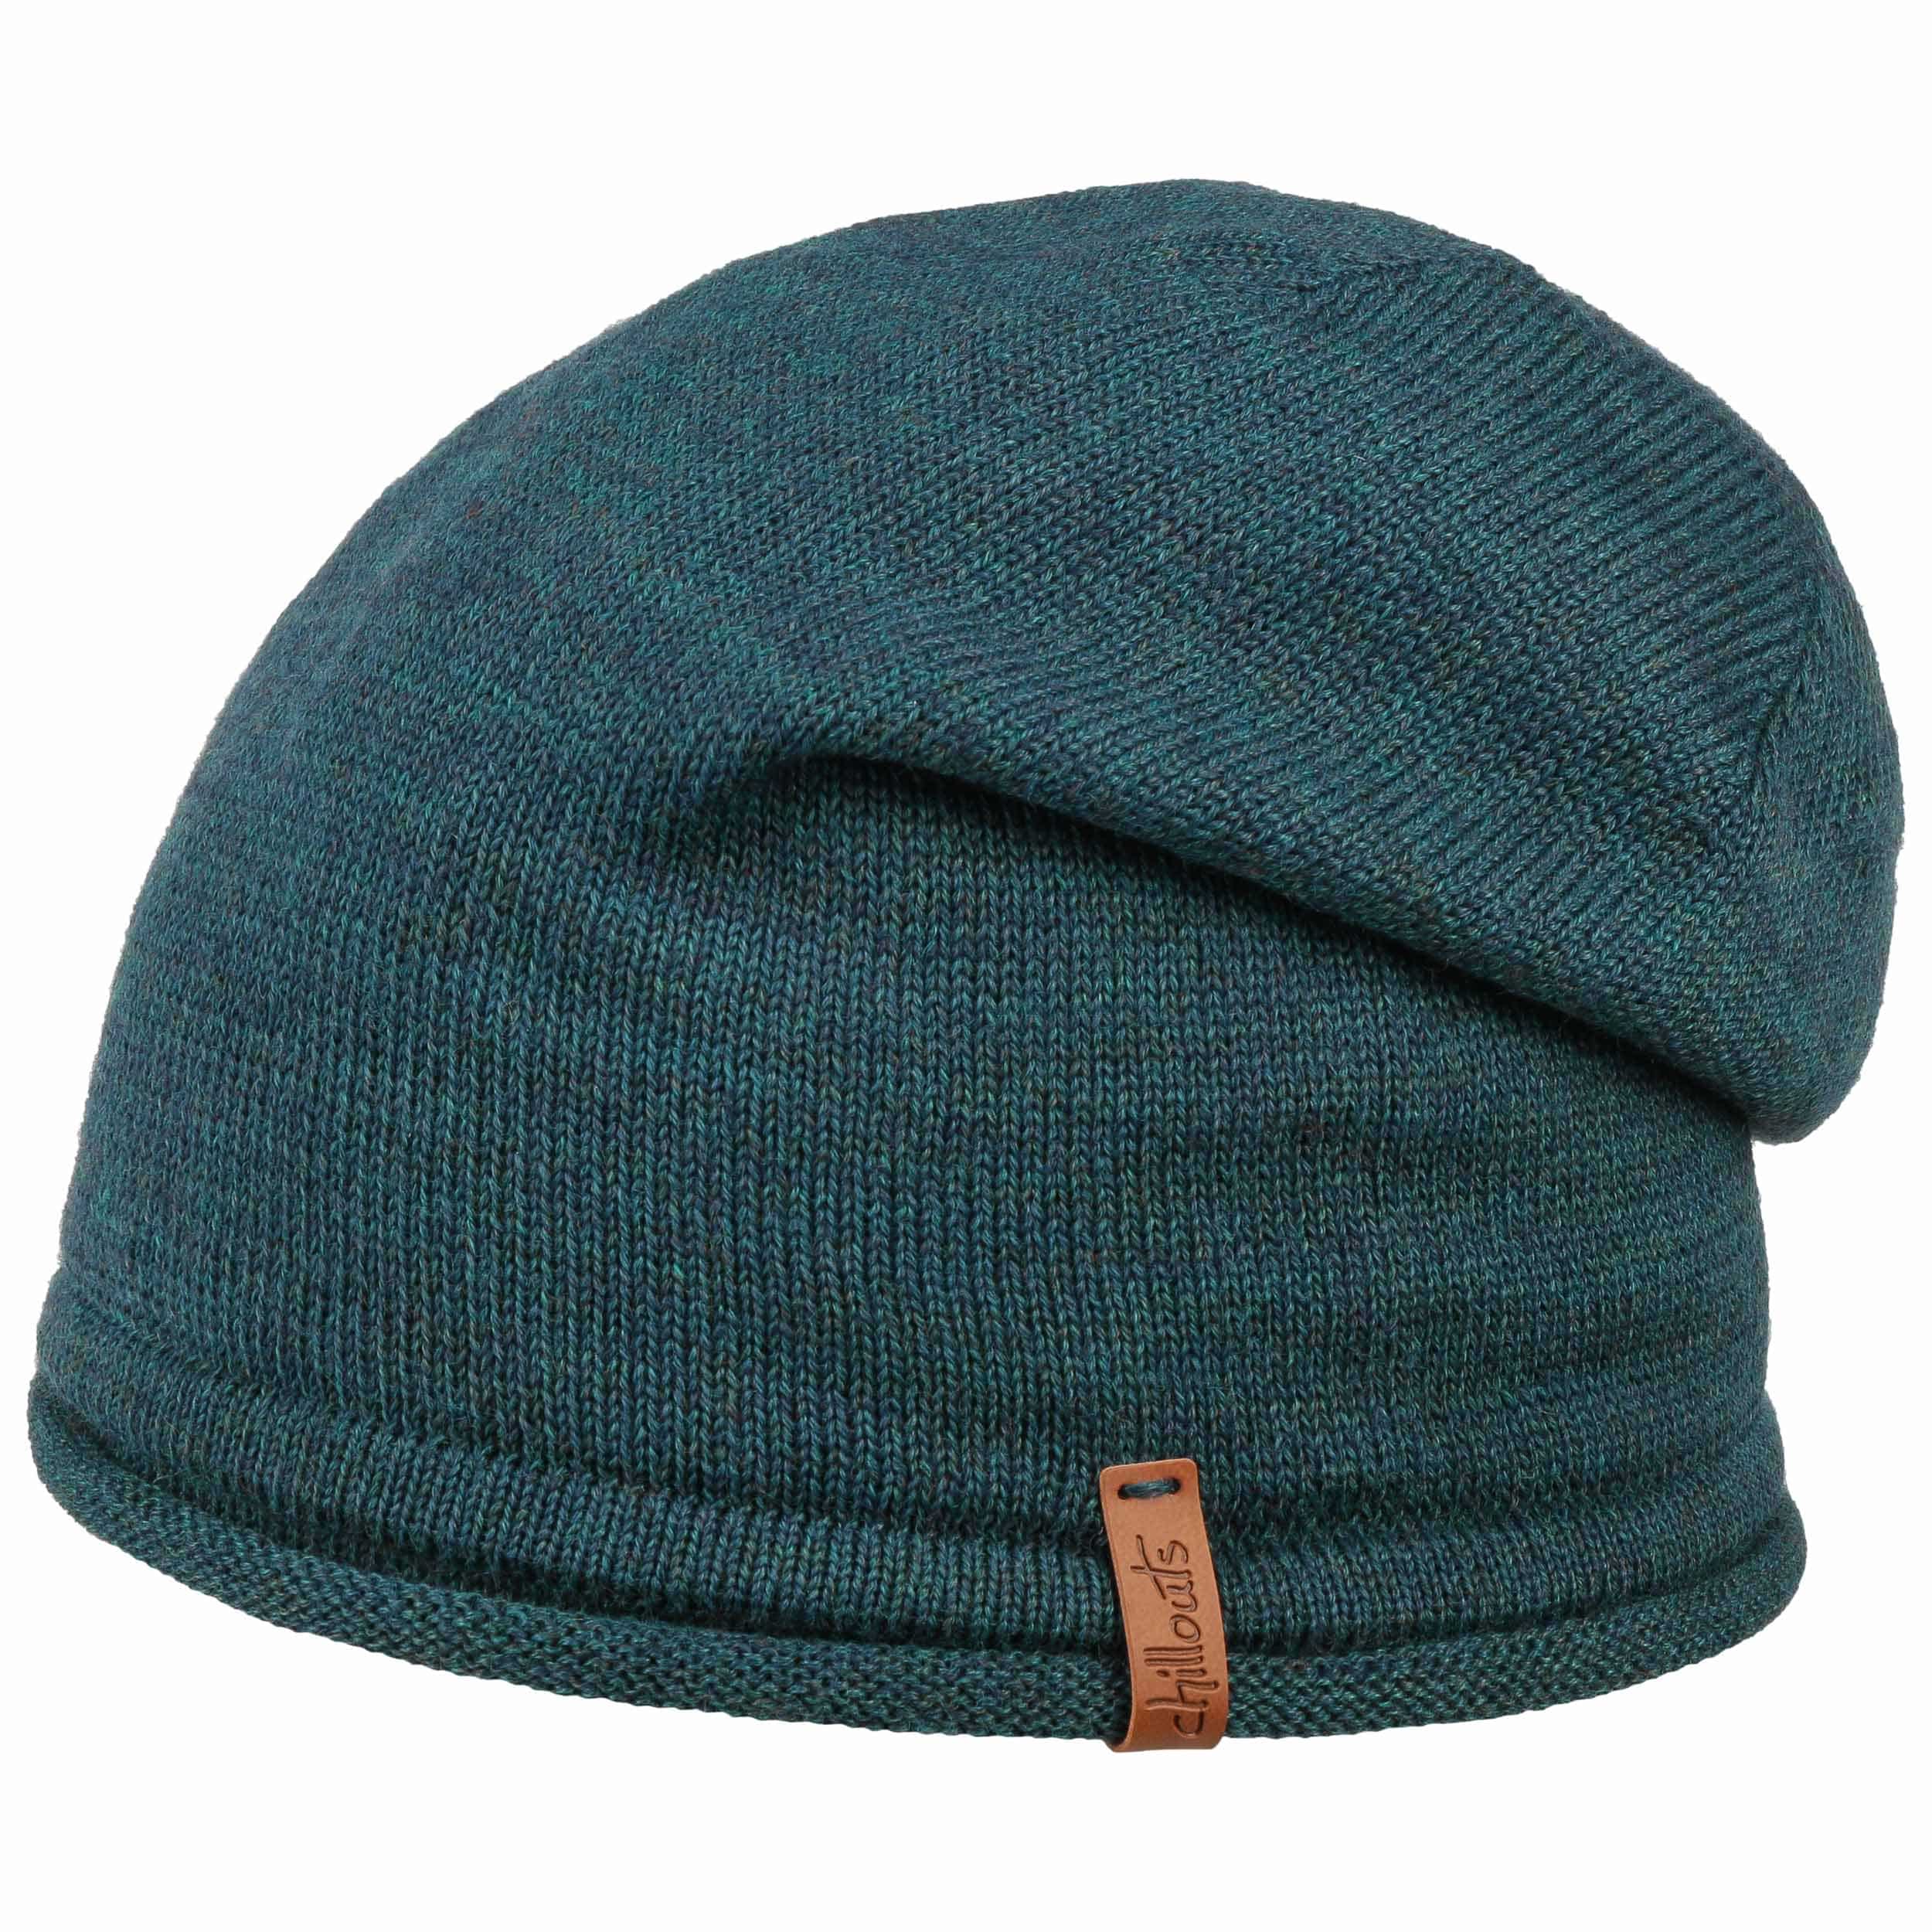 Beanie Oversize Leicester - 29,95 € by Chillouts